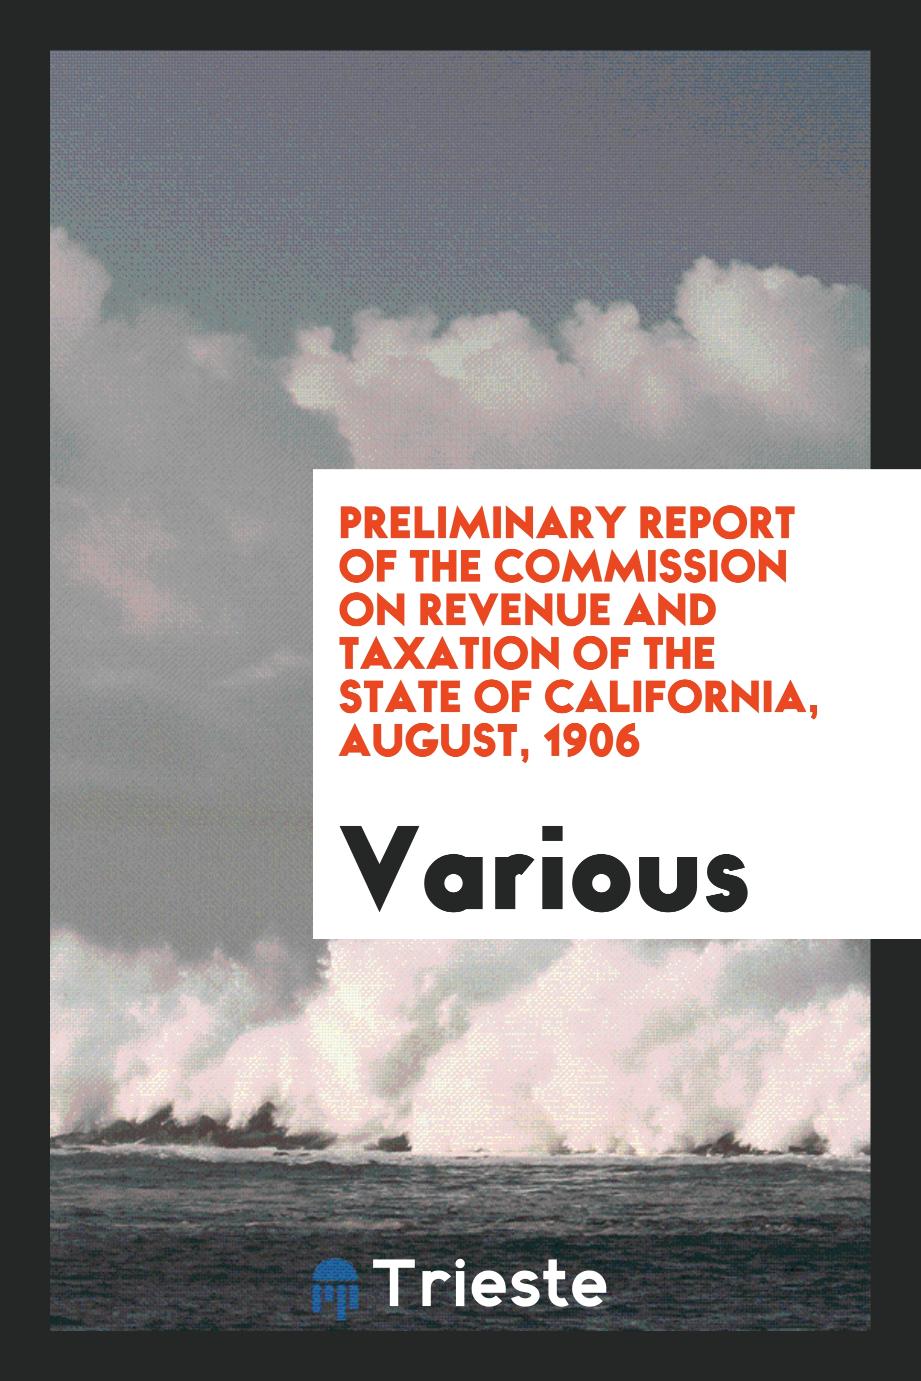 Preliminary Report of the Commission on Revenue and Taxation of the State of California, August, 1906